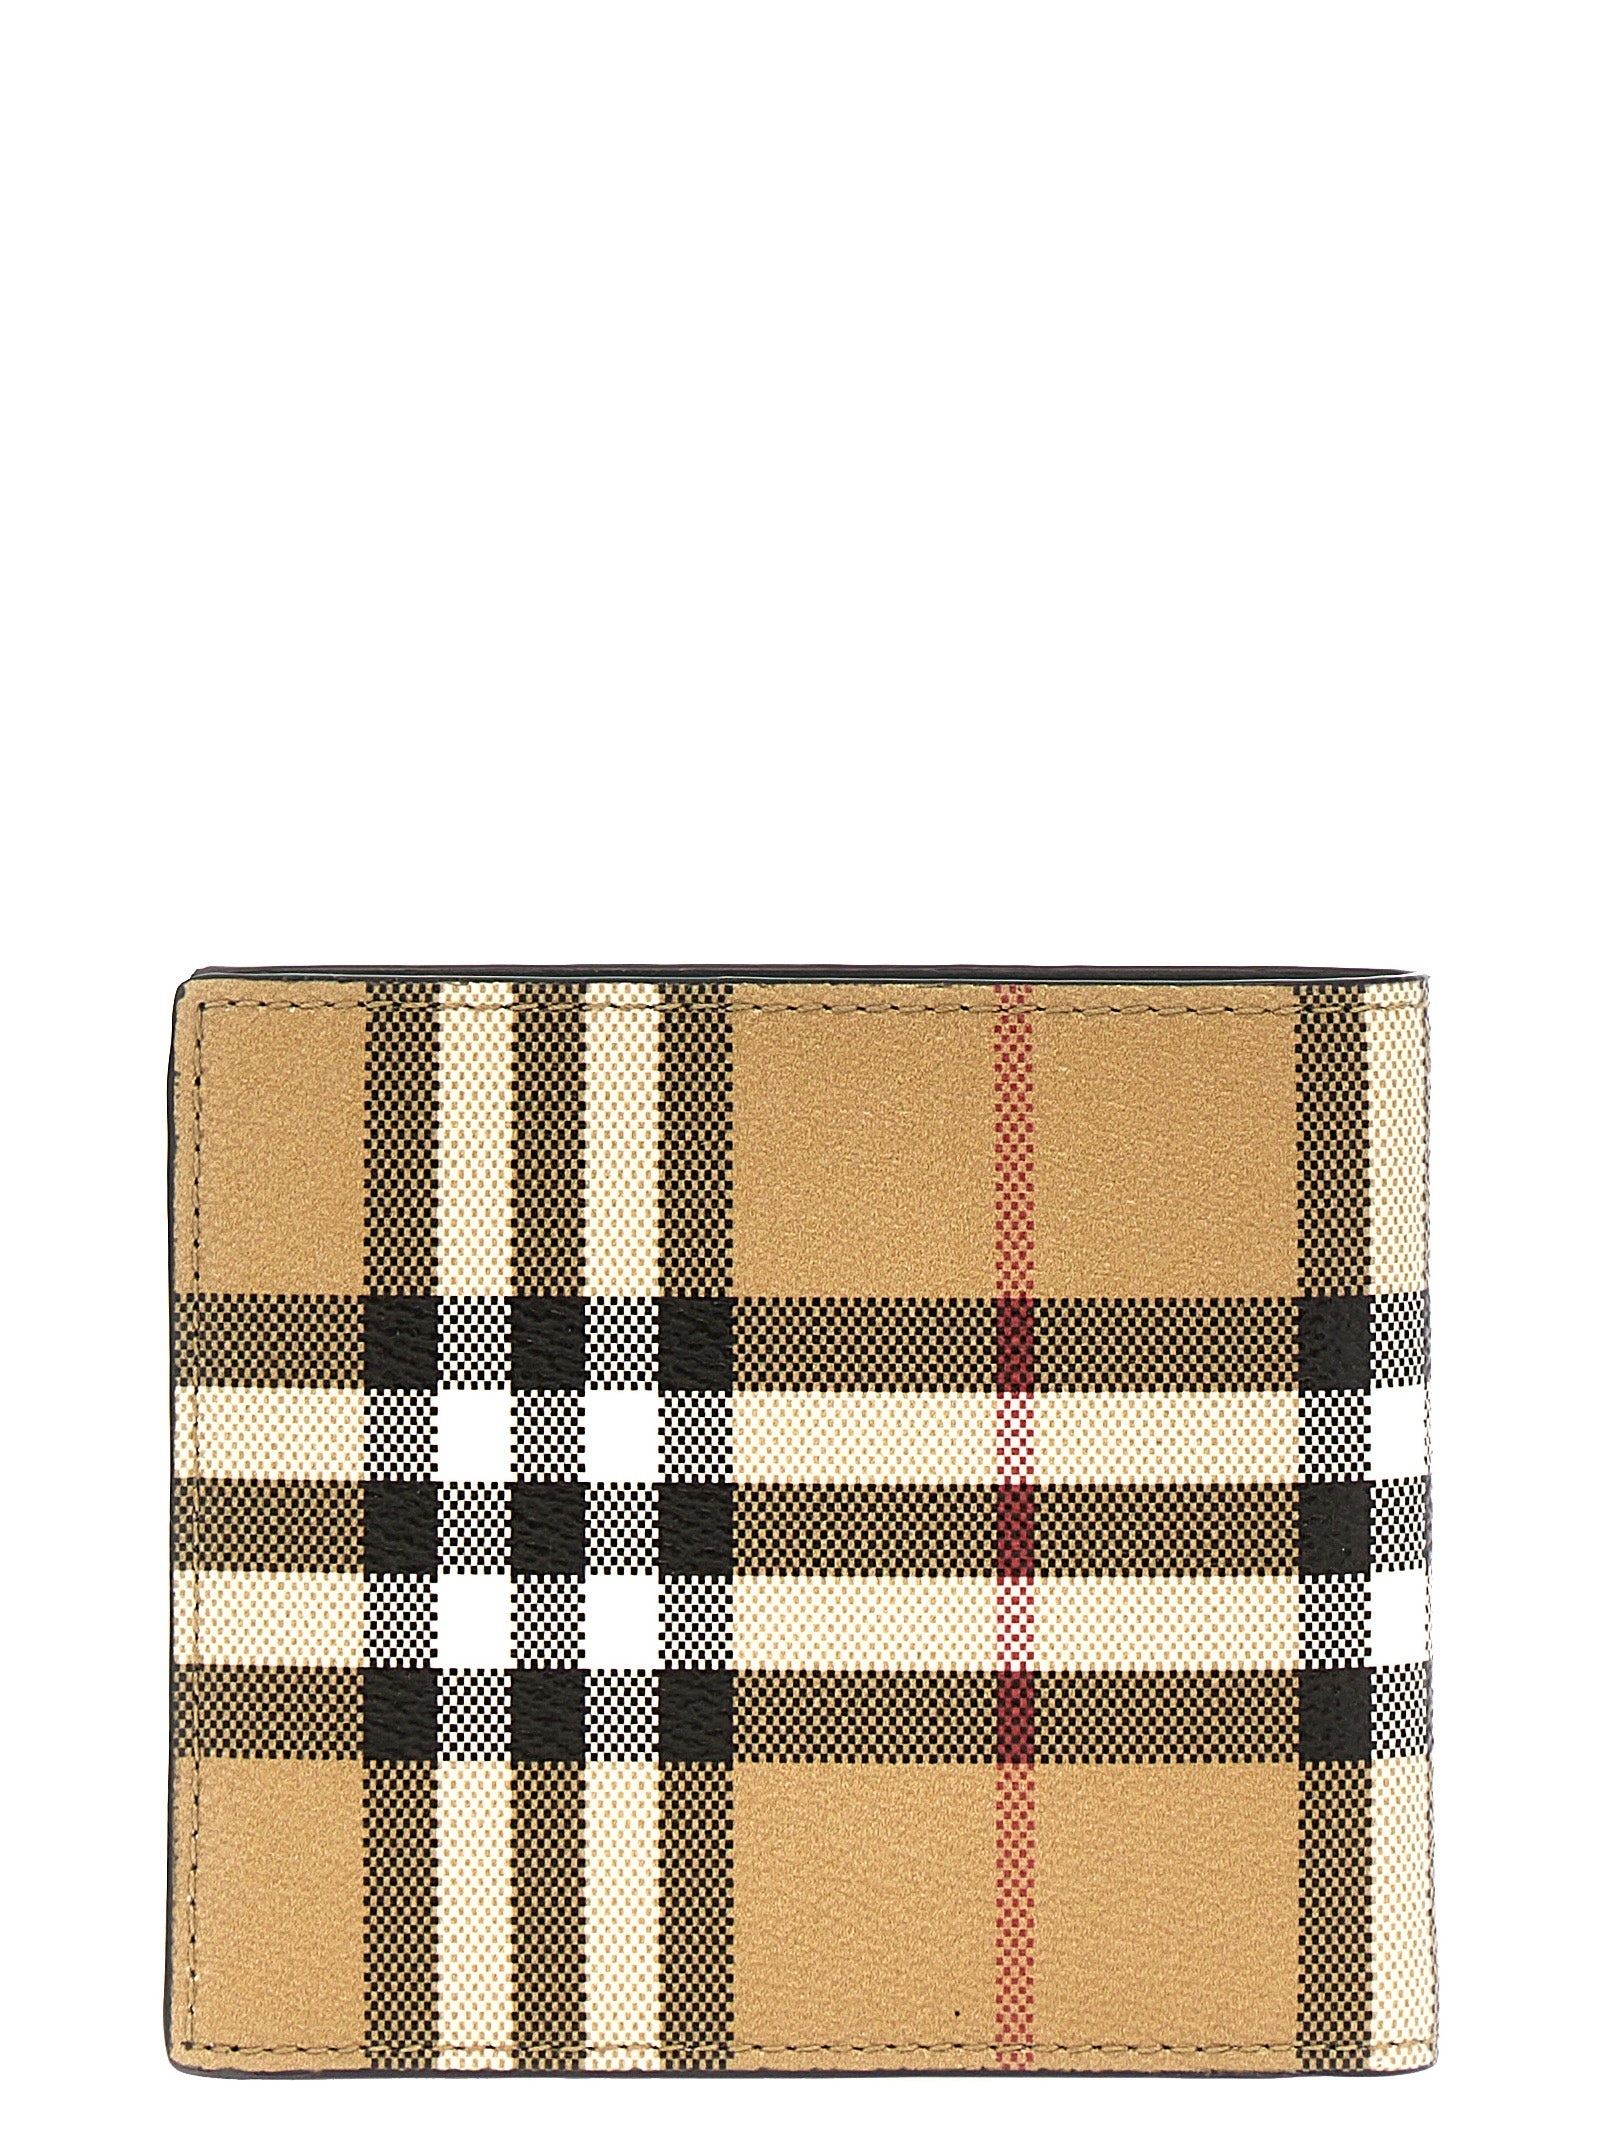 Burberry Check Wallet - 2